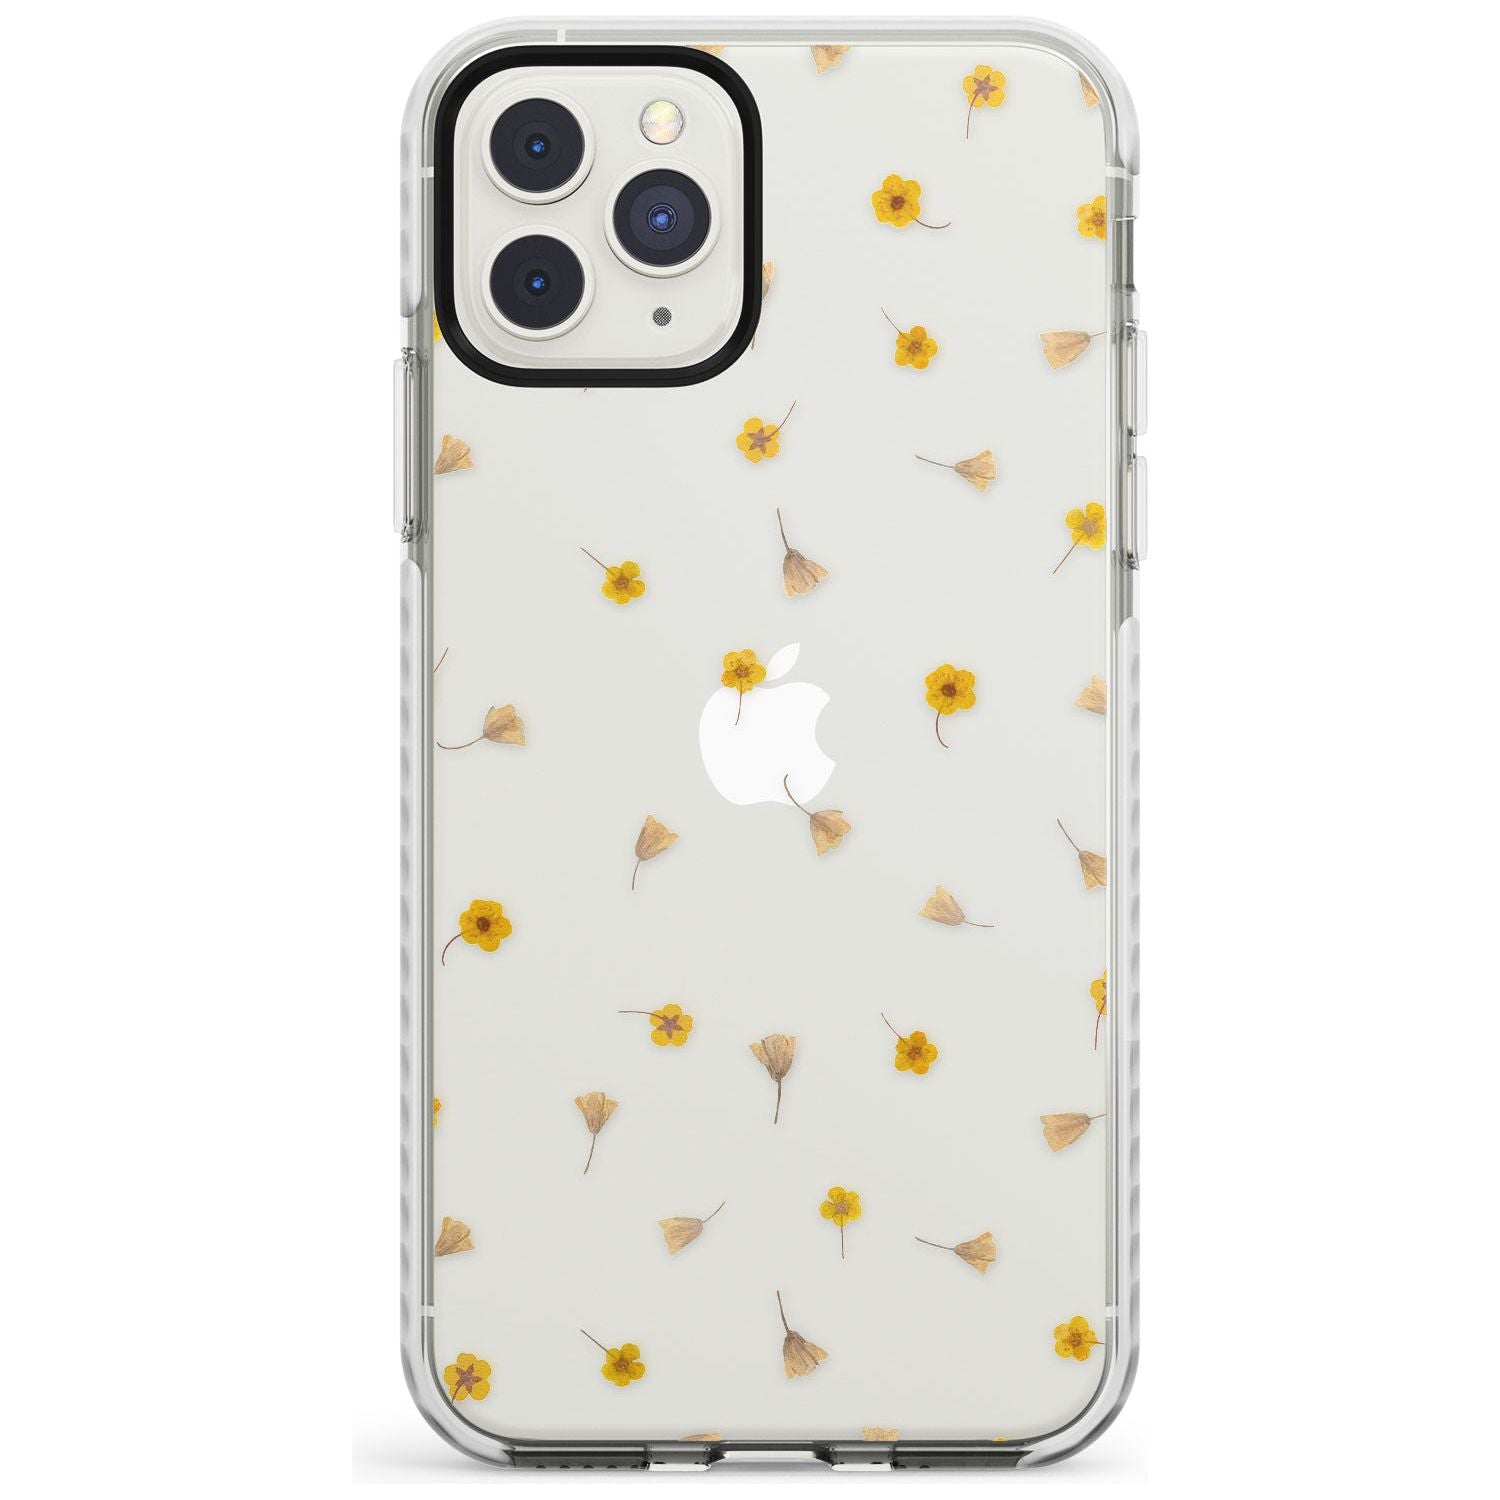 Small Flower Mix - Dried Flower-Inspired Design Impact Phone Case for iPhone 11 Pro Max